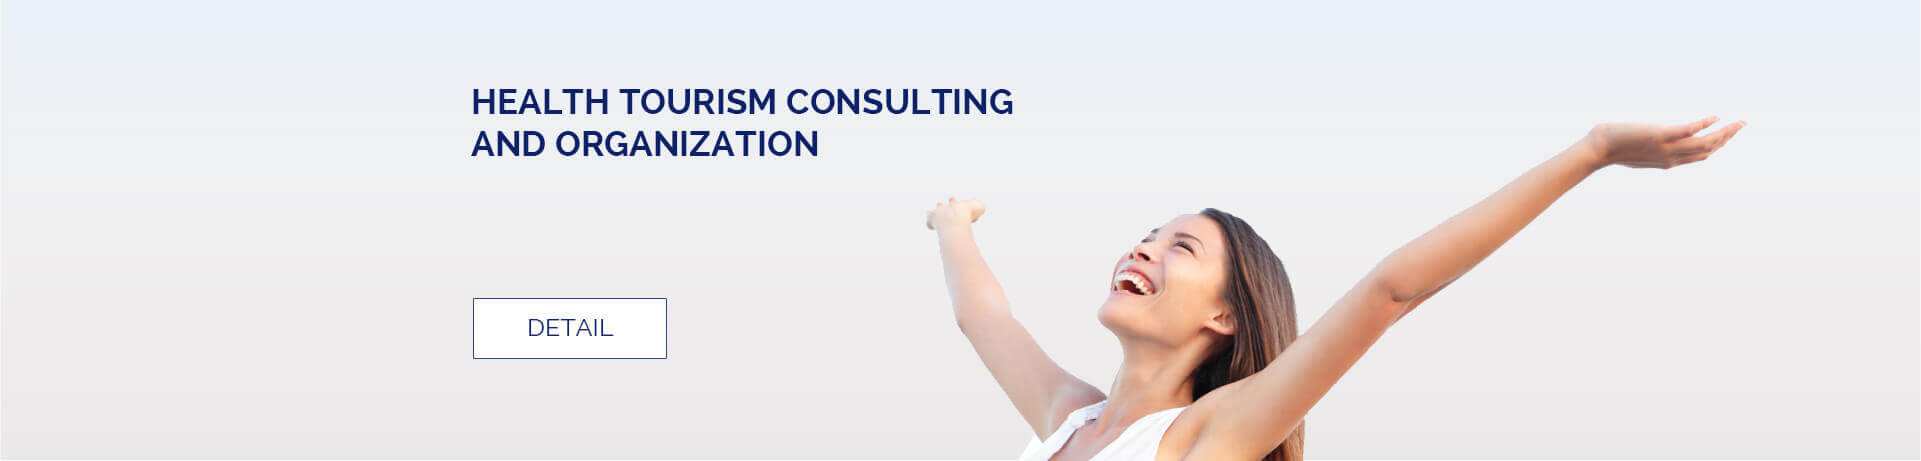 Health Tourism Consulting